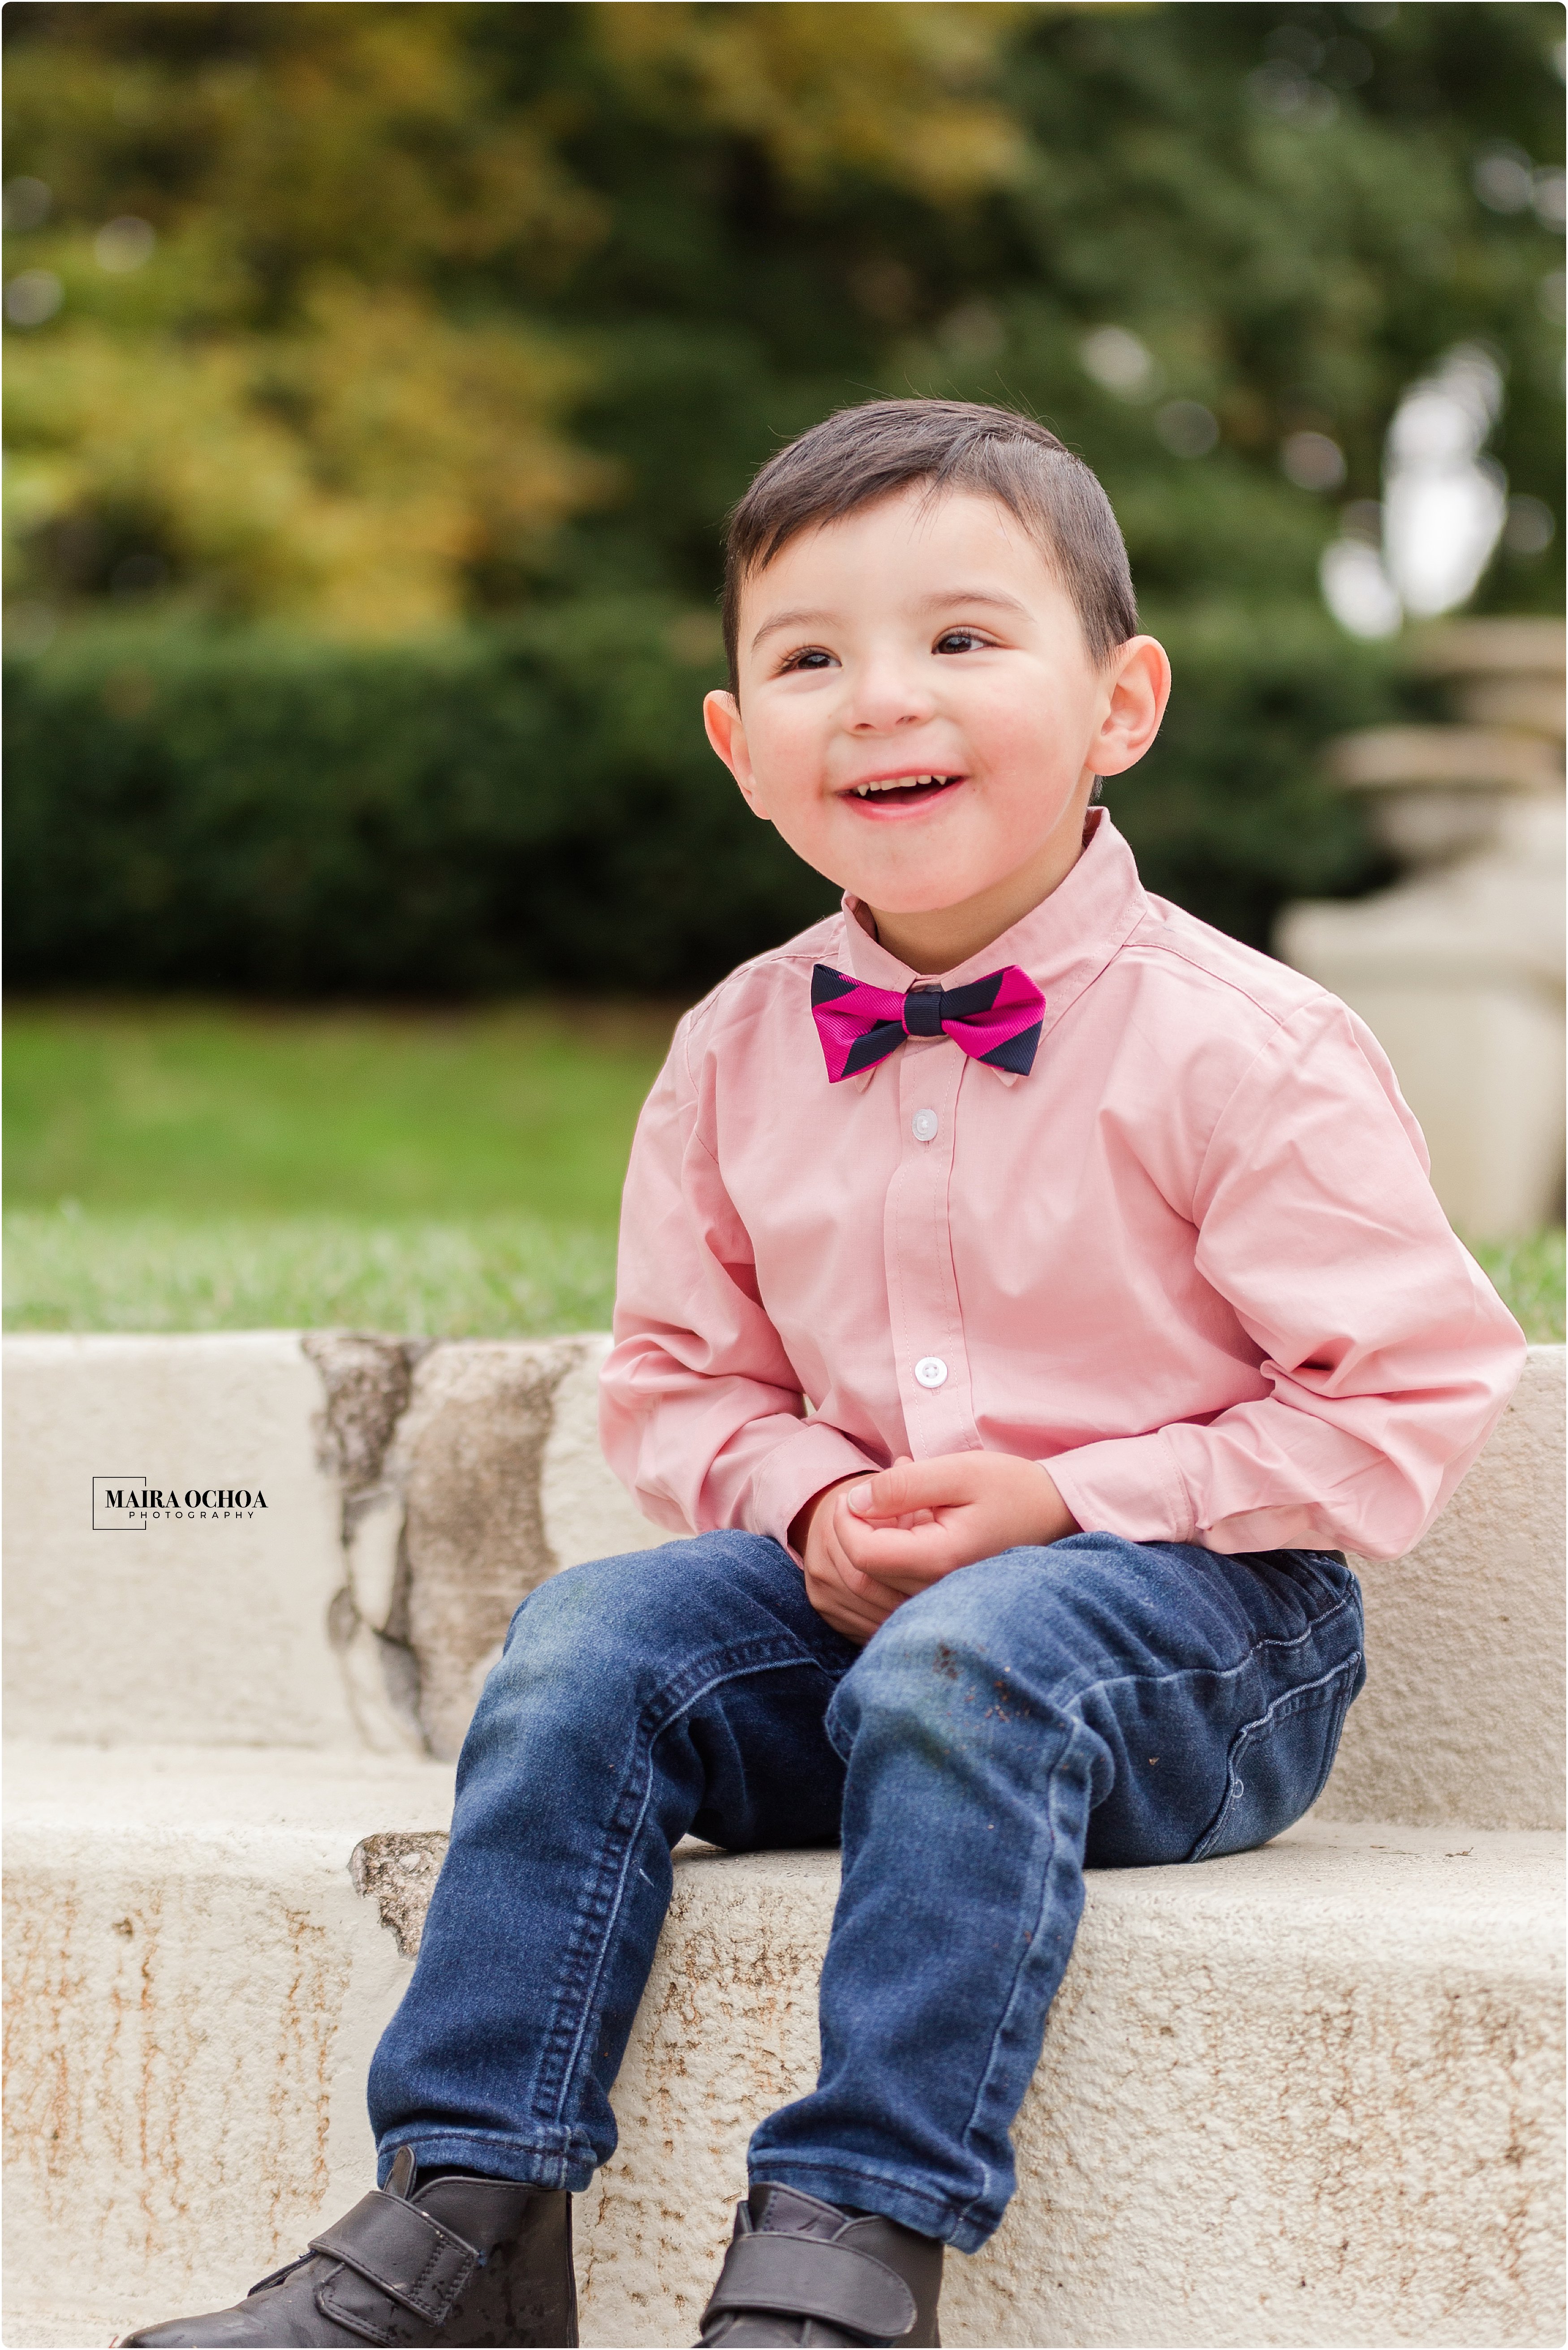 Cantigny Park, Wheaton, IL Family Session, Maternity Session, Children photos, Brothers, Kids, Expecting, Mother and son